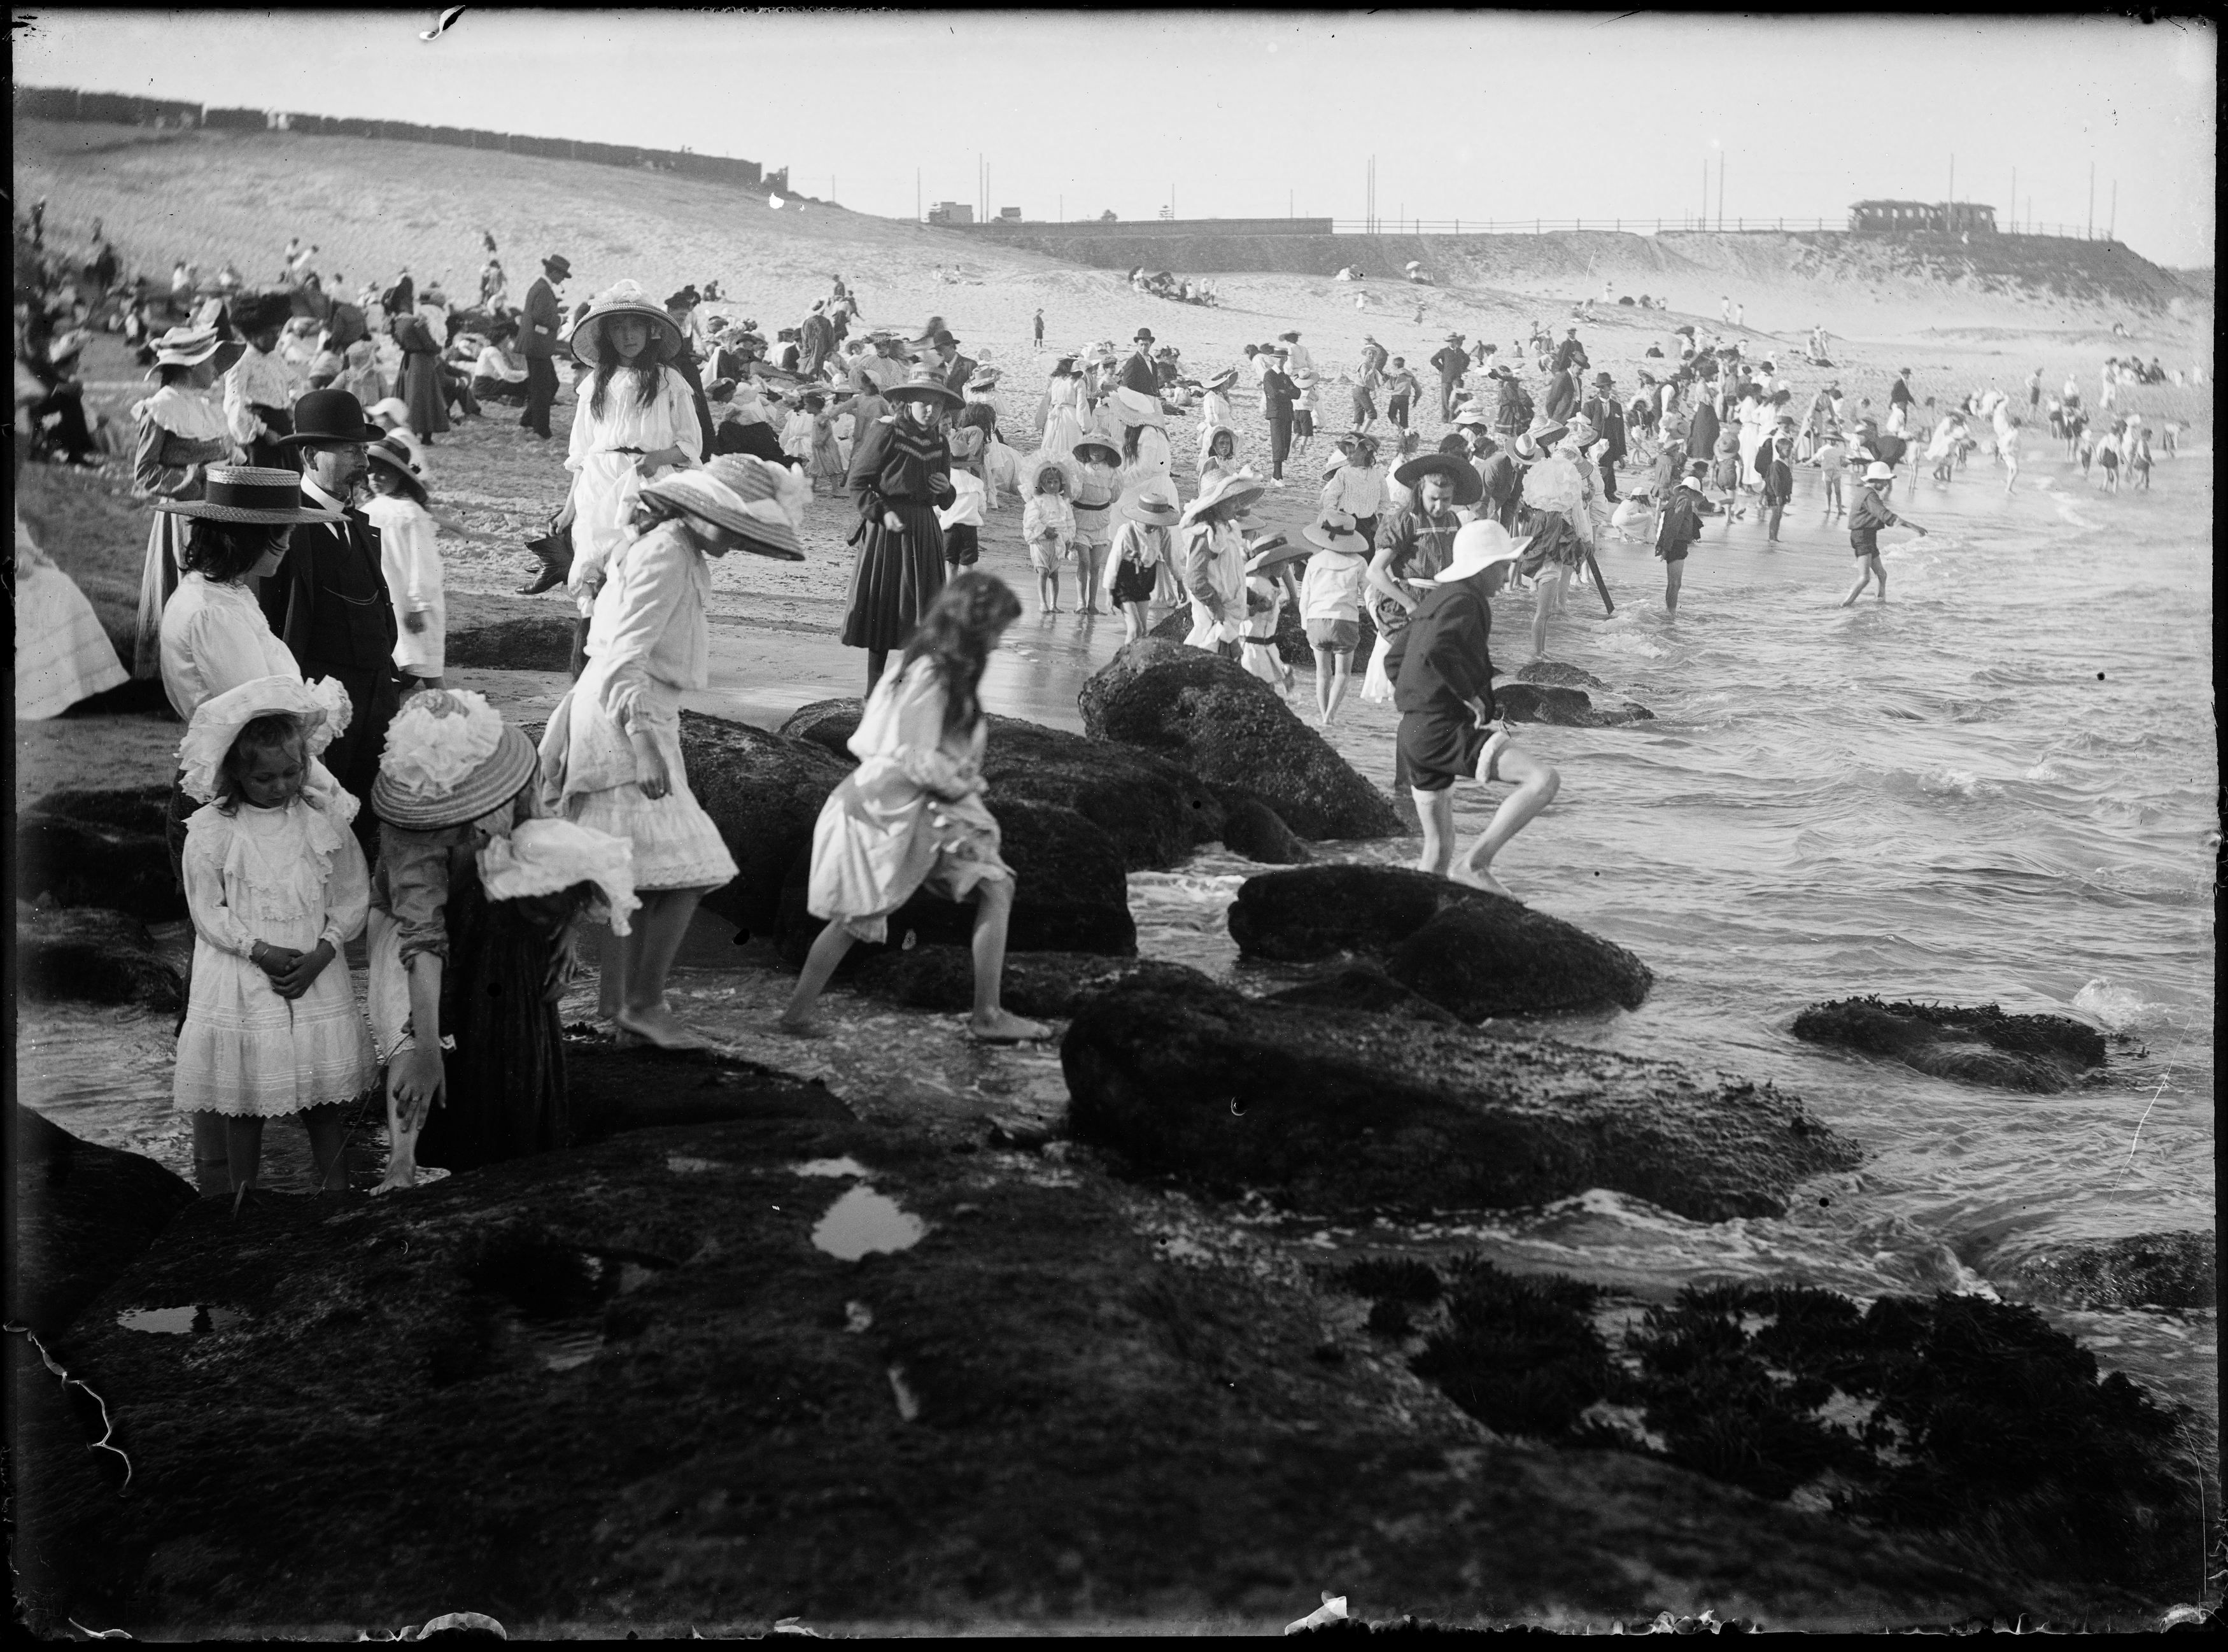 A black and white photograph of a crowded beach. Most people are fully clothed in 19th Century dress. 